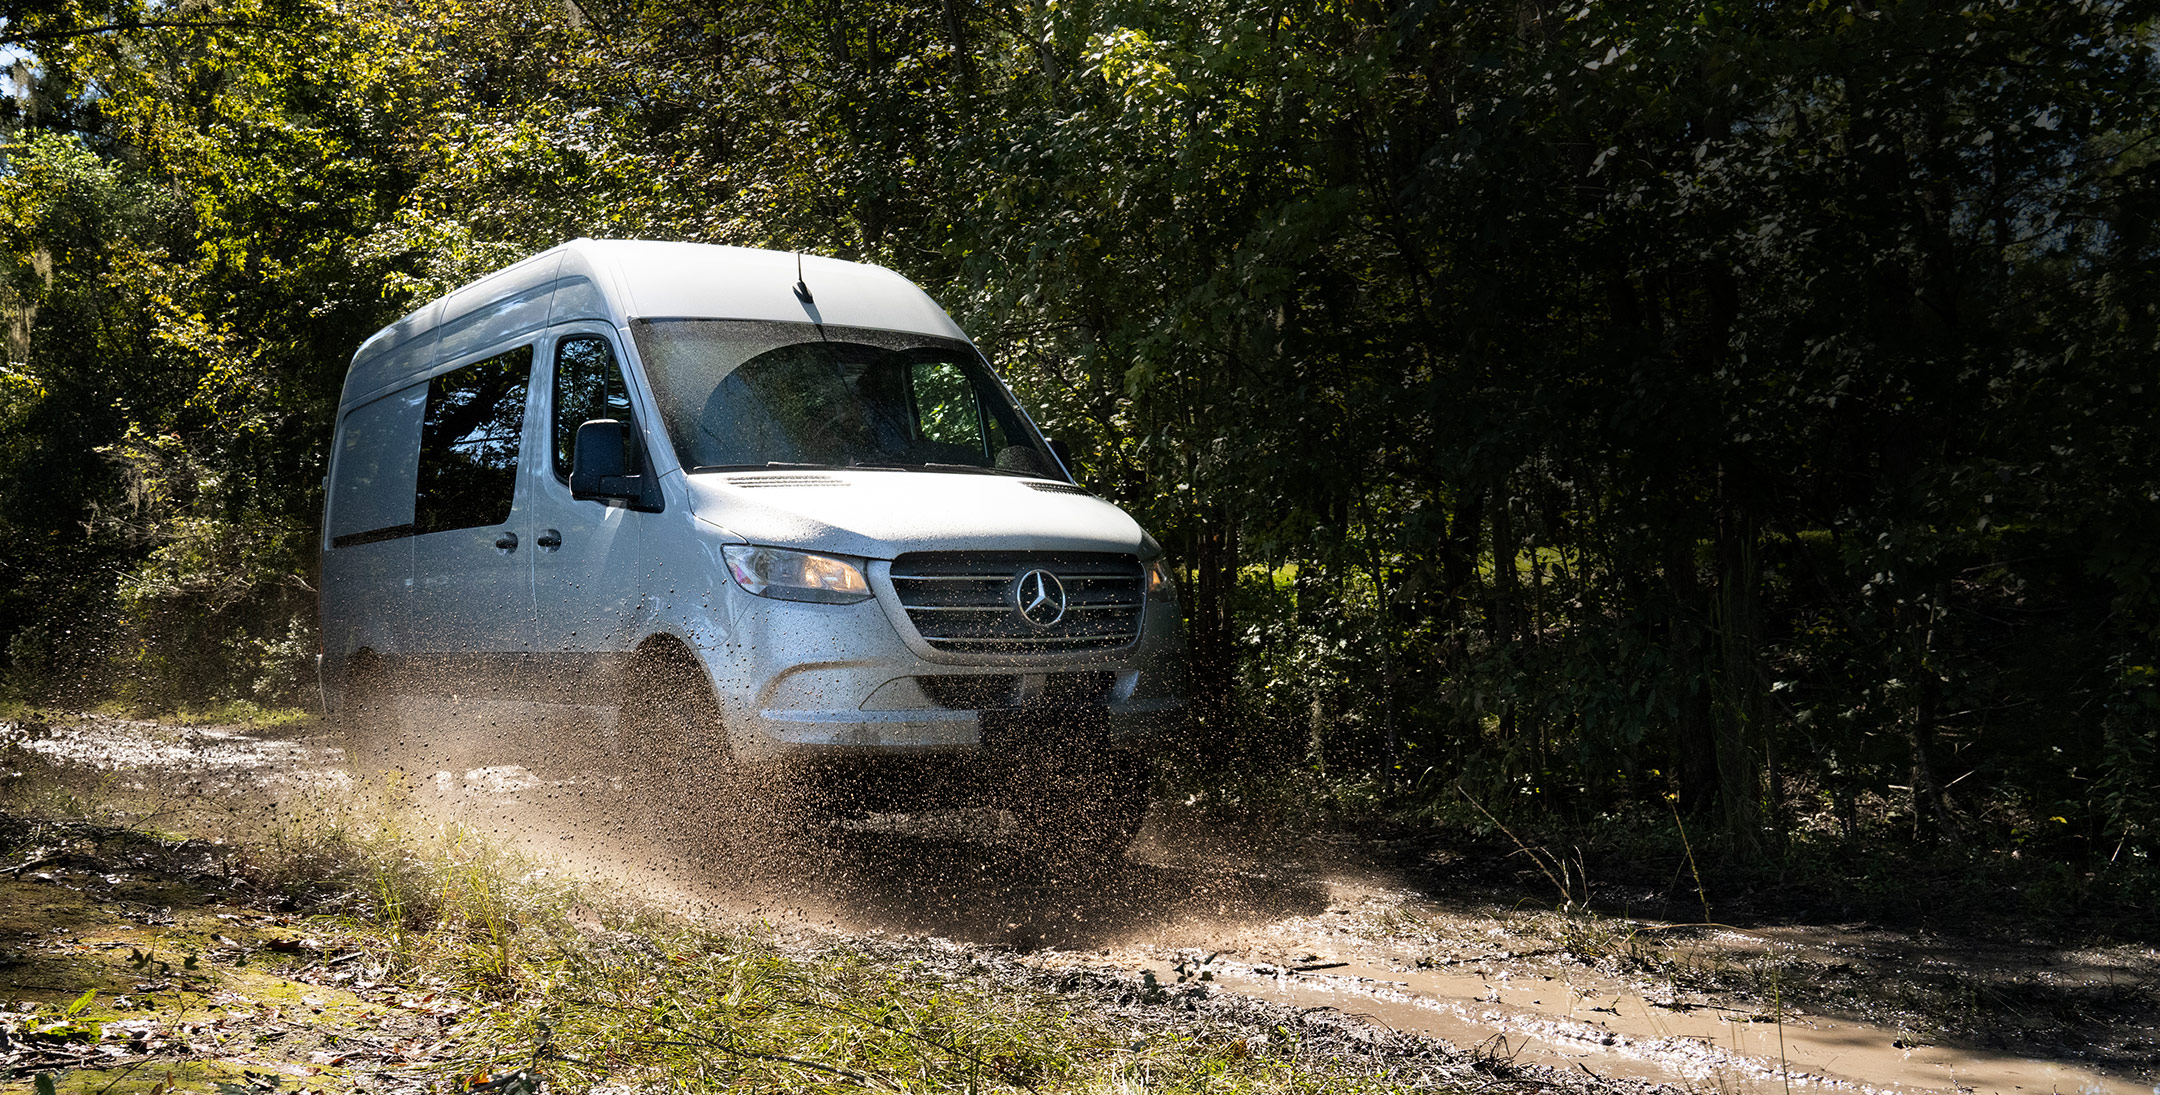 A Mercedes-Benz Sprinter has been converted to go glamping, her is an action shot driving through the woods!